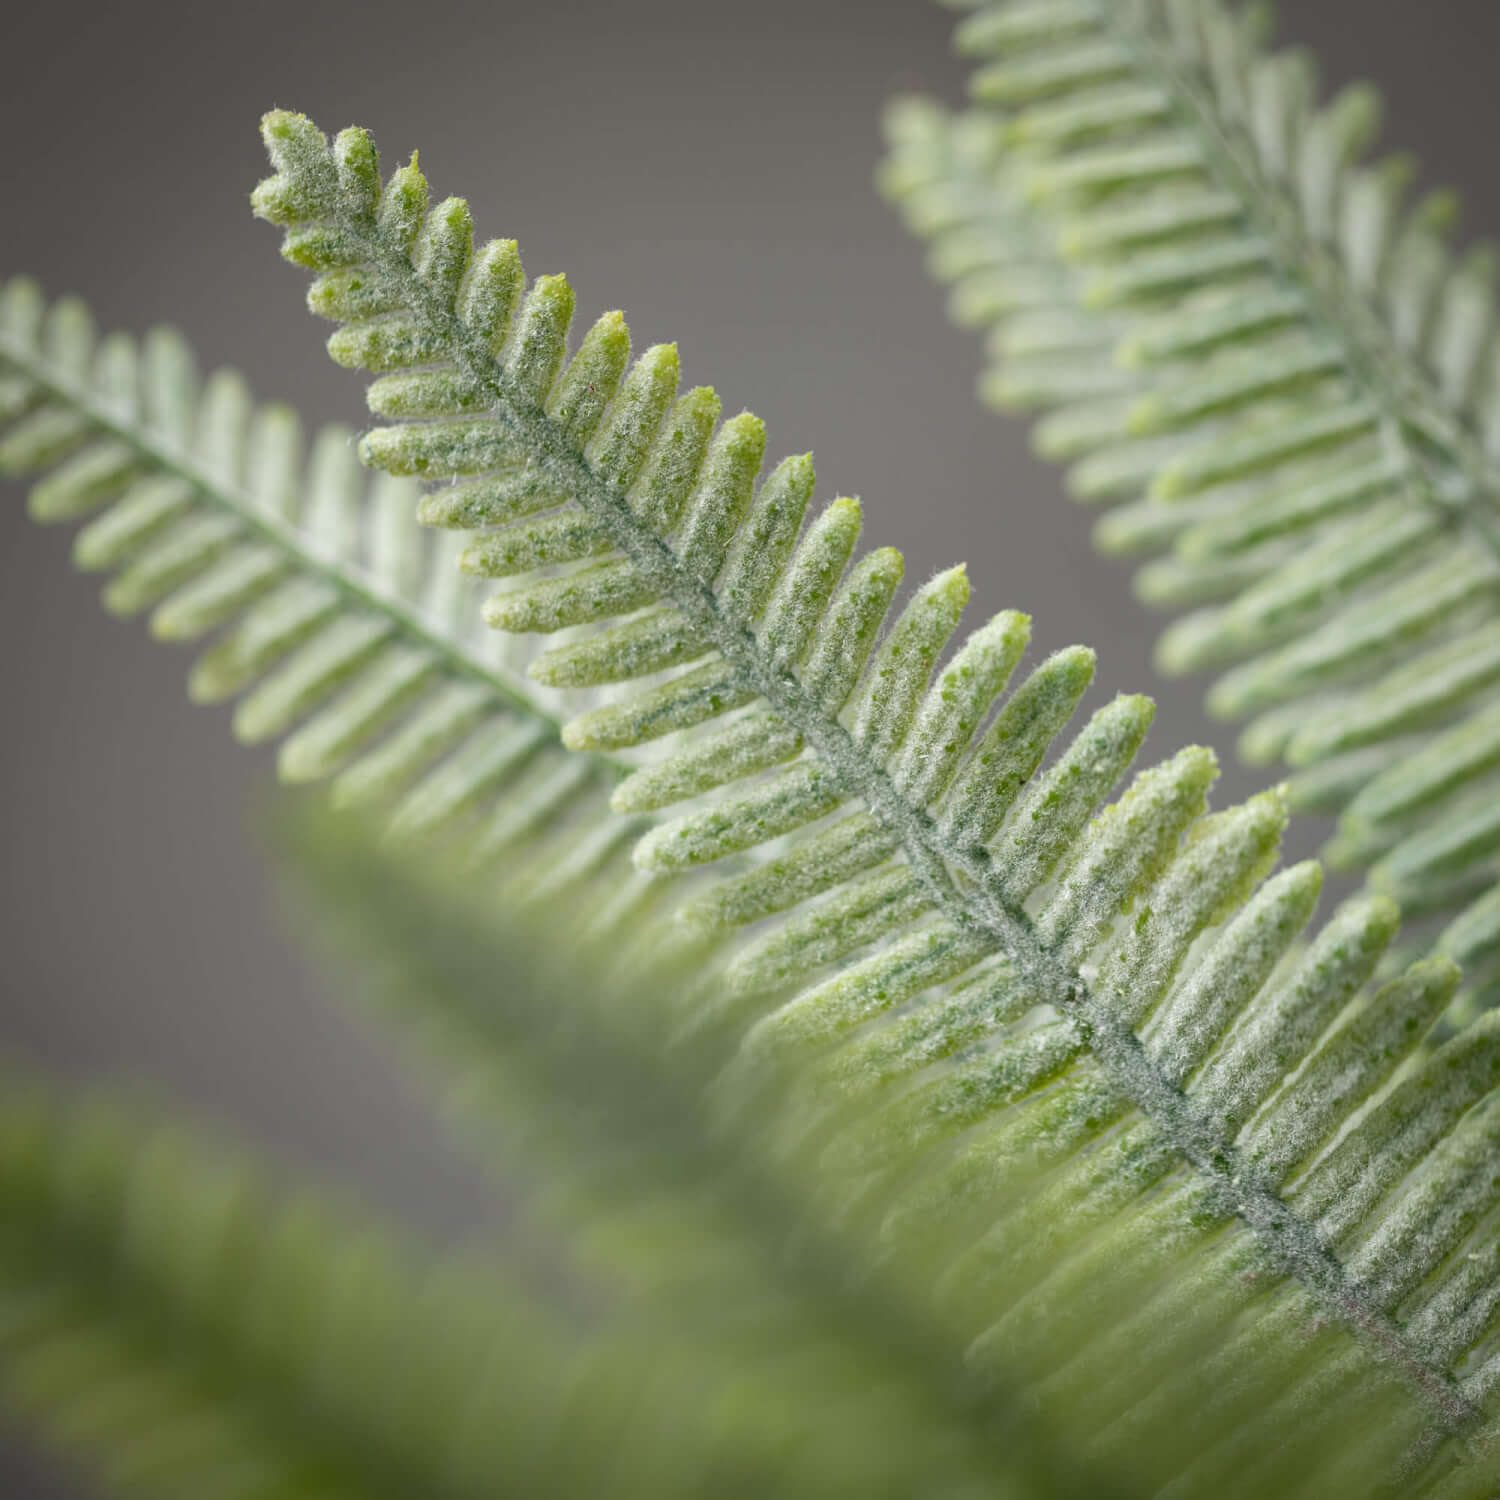 close up view of the feathery fern bush